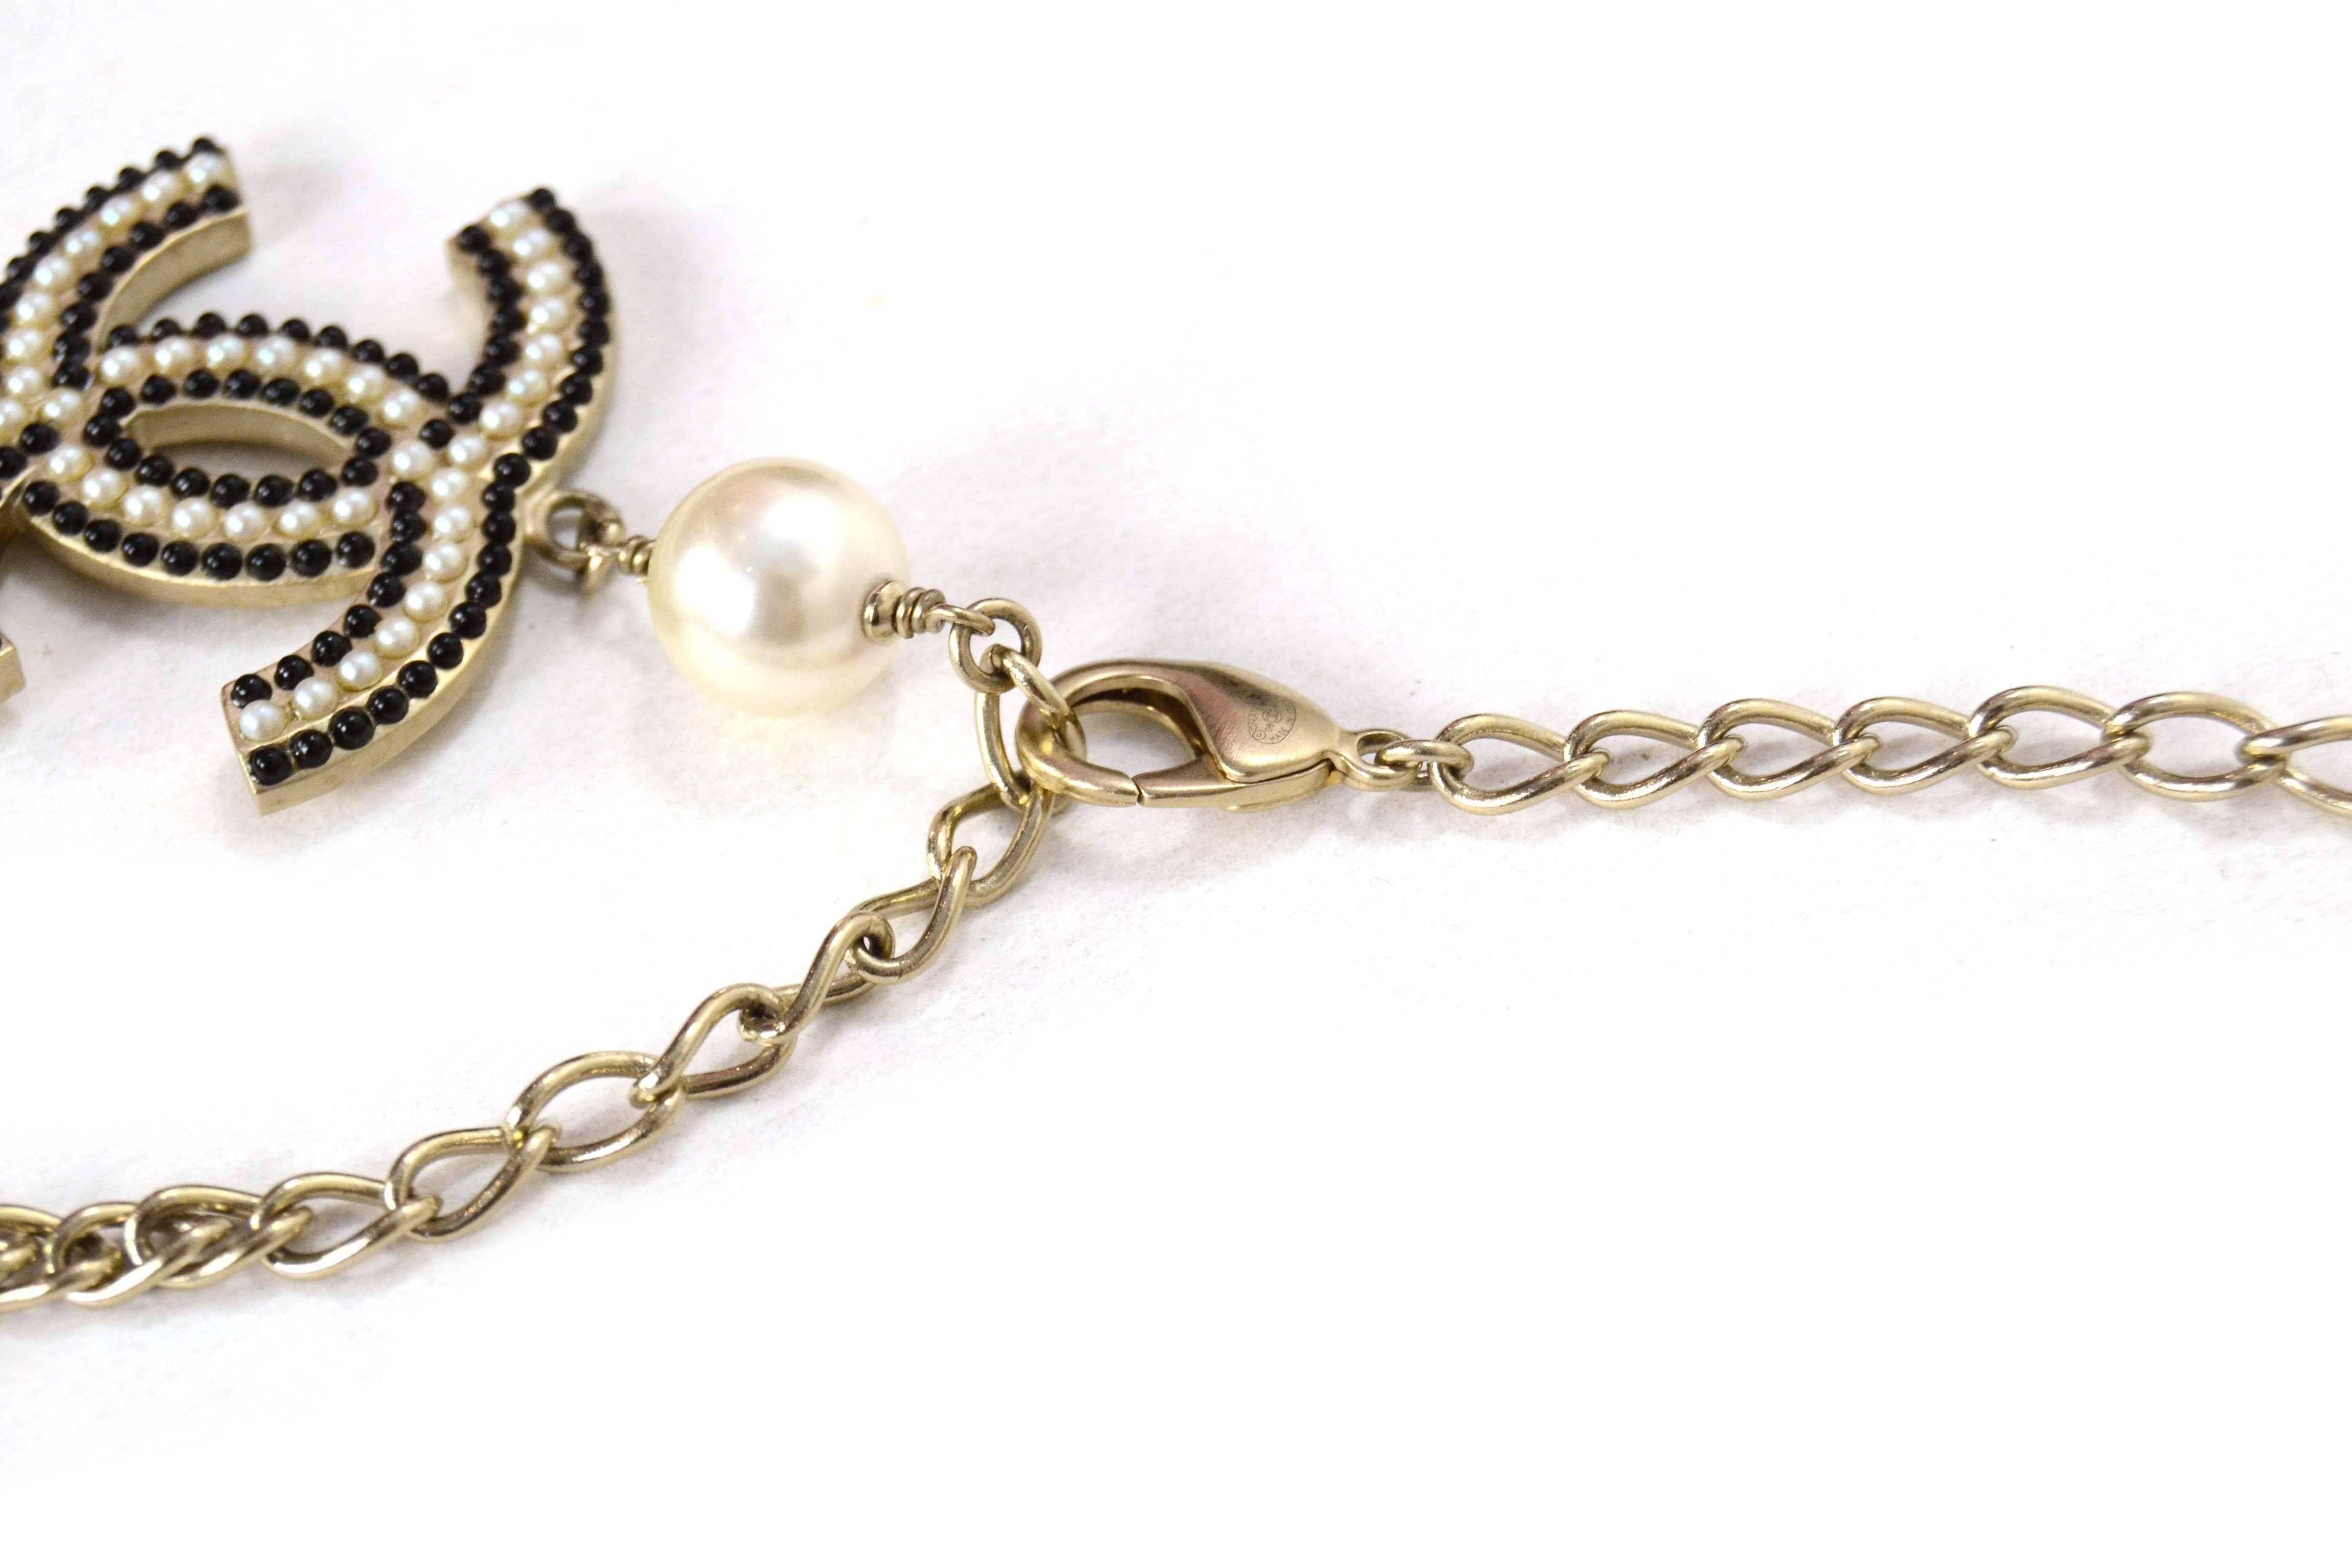 Chanel Pale Gold Multi-Strand Carousel Necklace 
Features one large CC pendant, three small CC pendants and faux pearls and black beads throughout
Made In: Italy
Year of Production: 2008
Color: Pale gold, ivory and black
Materials: Metal, faux